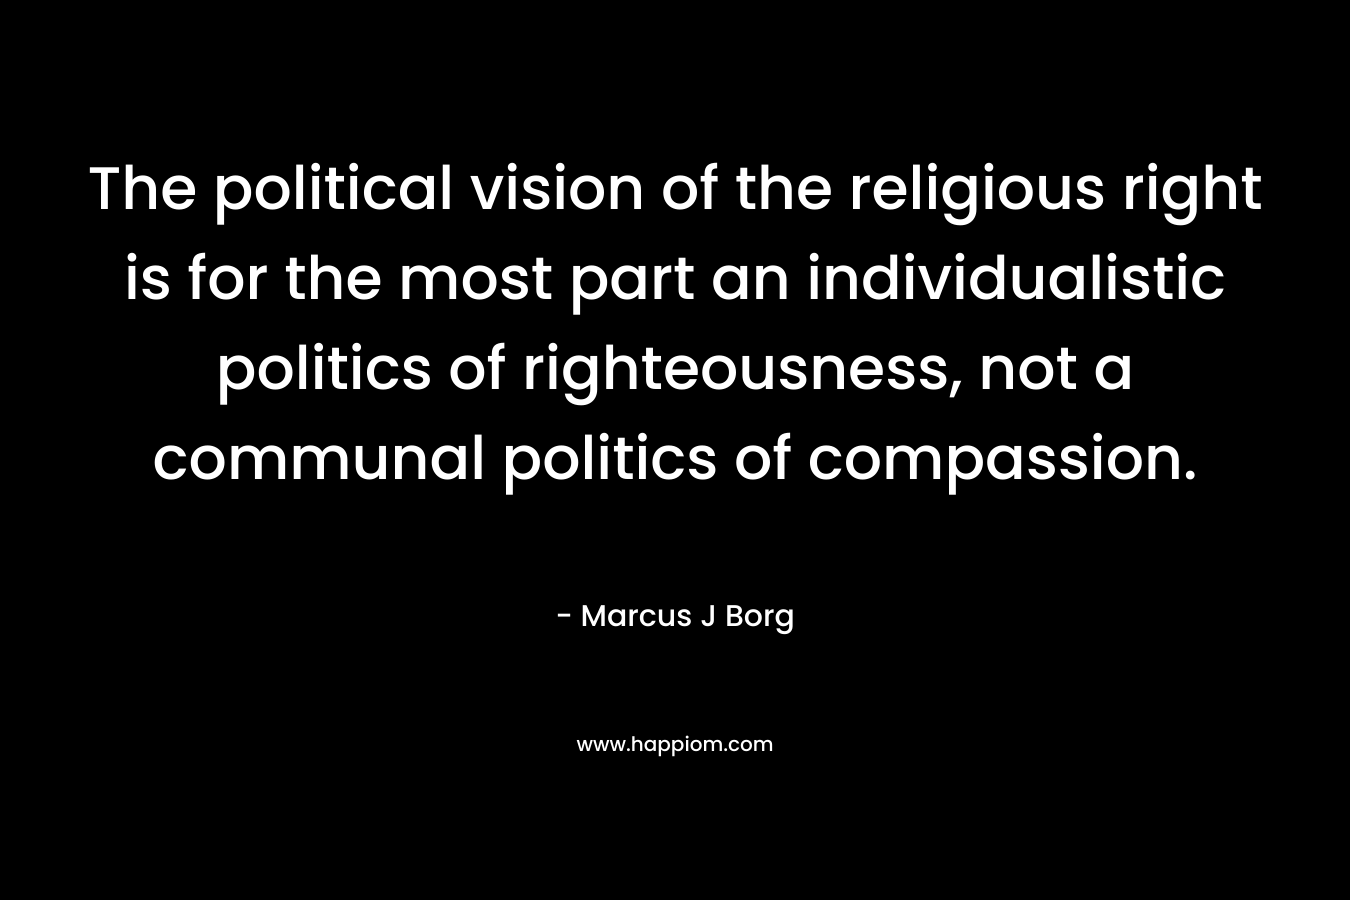 The political vision of the religious right is for the most part an individualistic politics of righteousness, not a communal politics of compassion. – Marcus J Borg